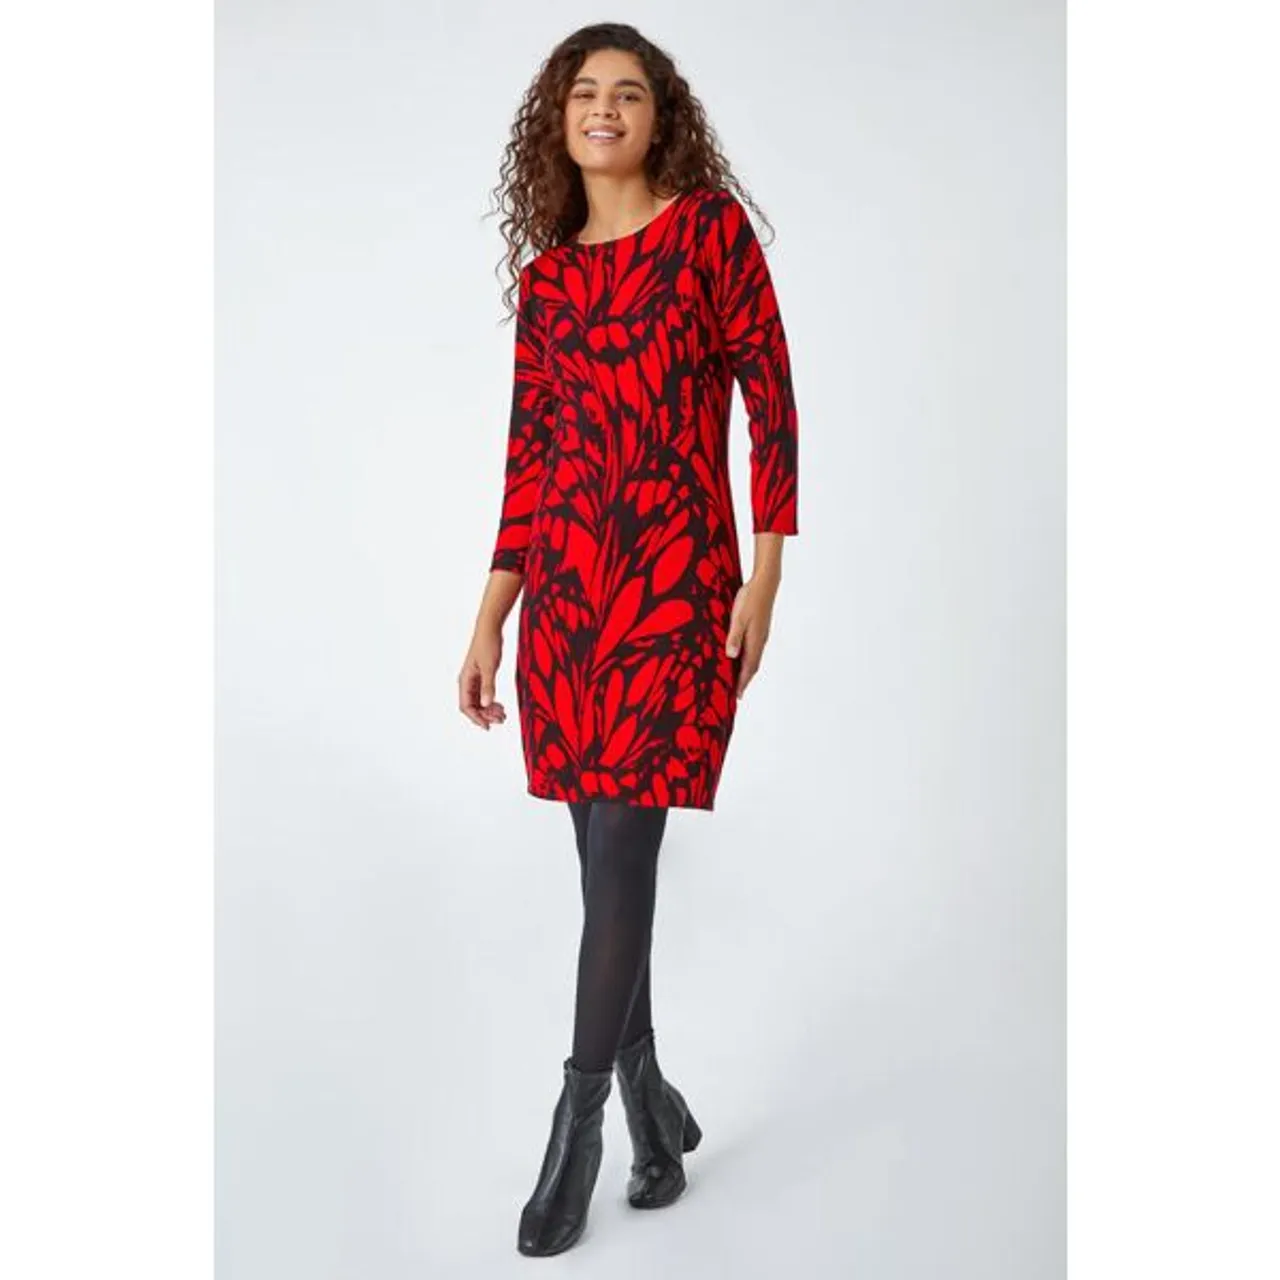 Roman Butterfly Print Knitted Stretch Dress in Red 20 female